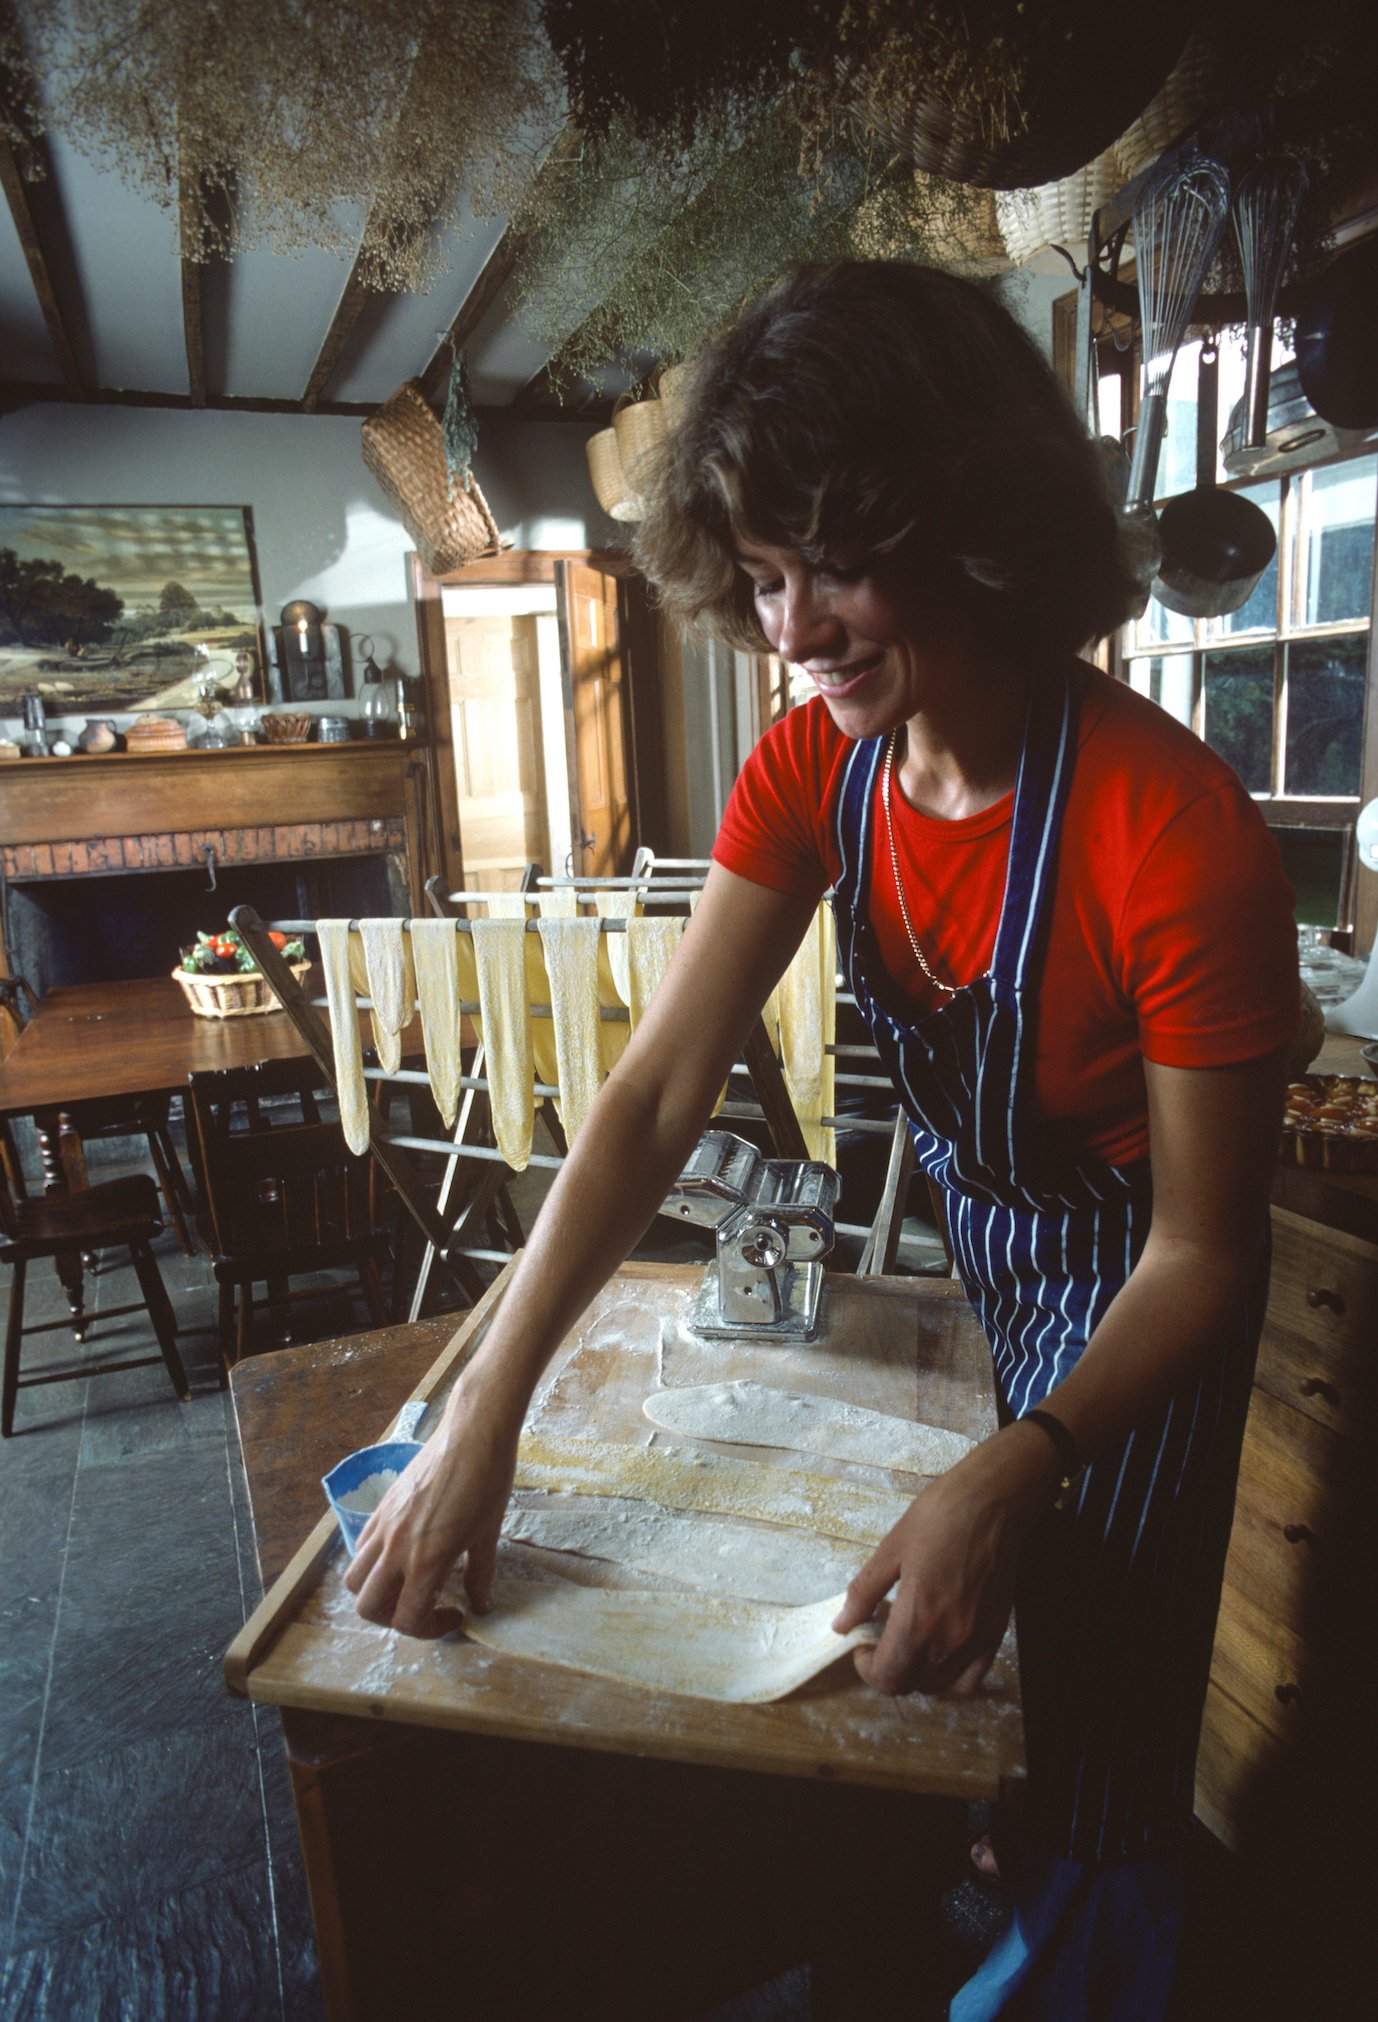 Martha Stewart in 1976 smiling and making her homemade pasta recipe in a kitchen